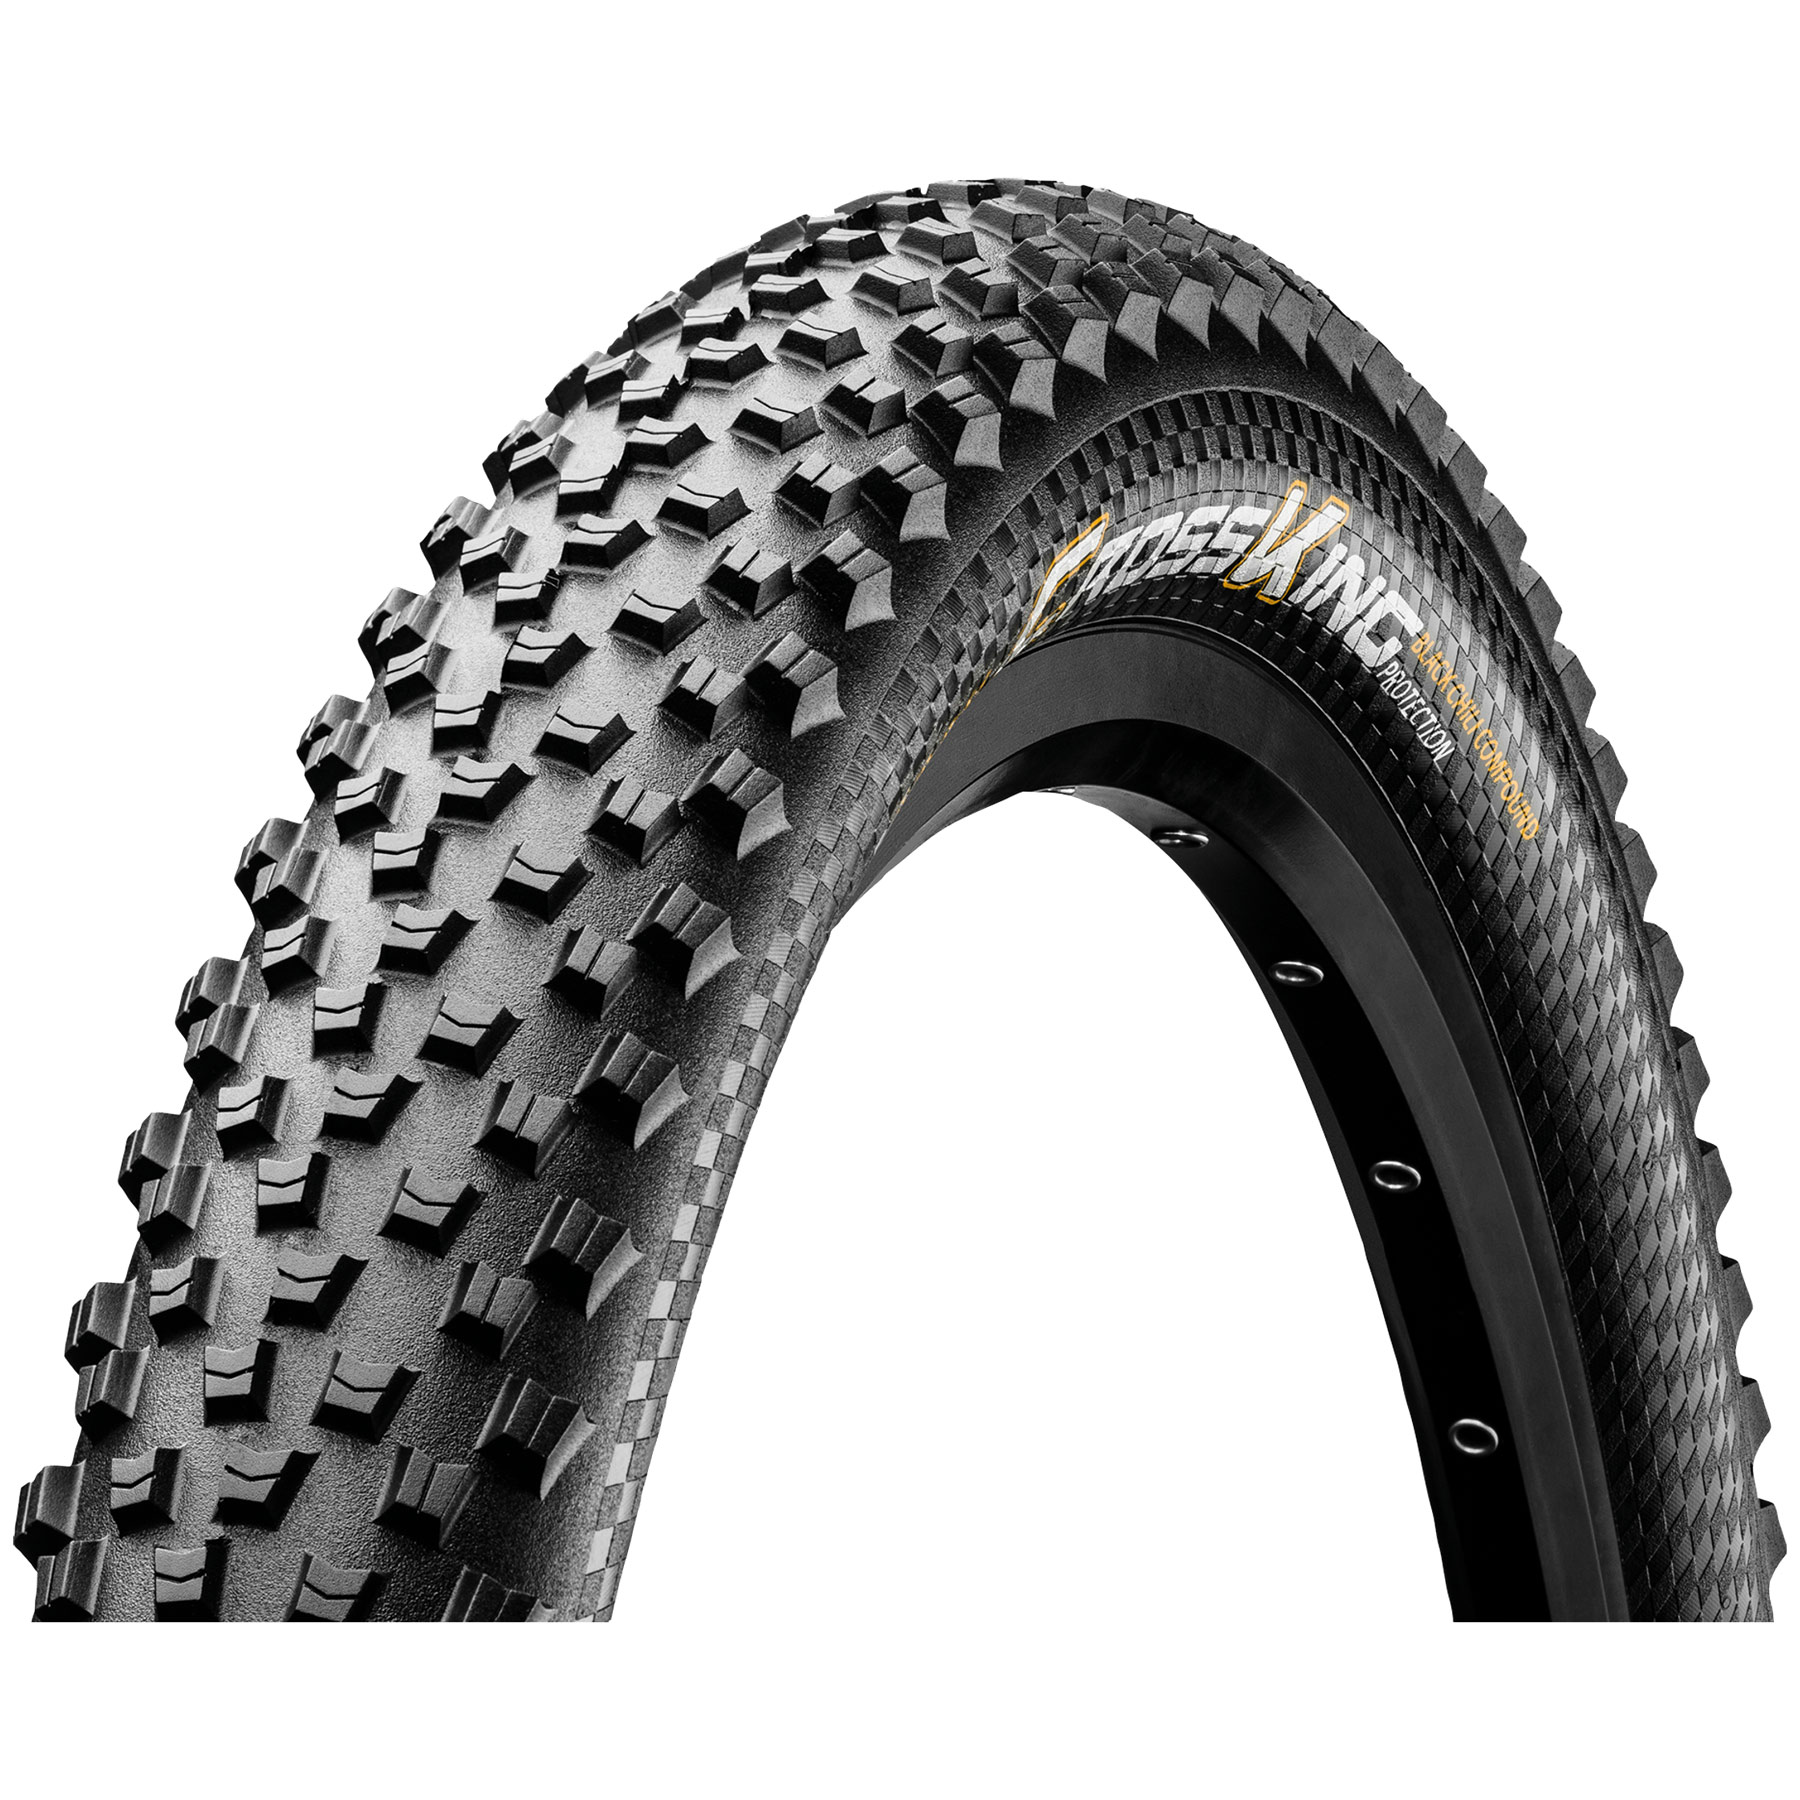 Picture of Continental Cross King ProTection Folding Tire - 27.5x2.60&quot; - black